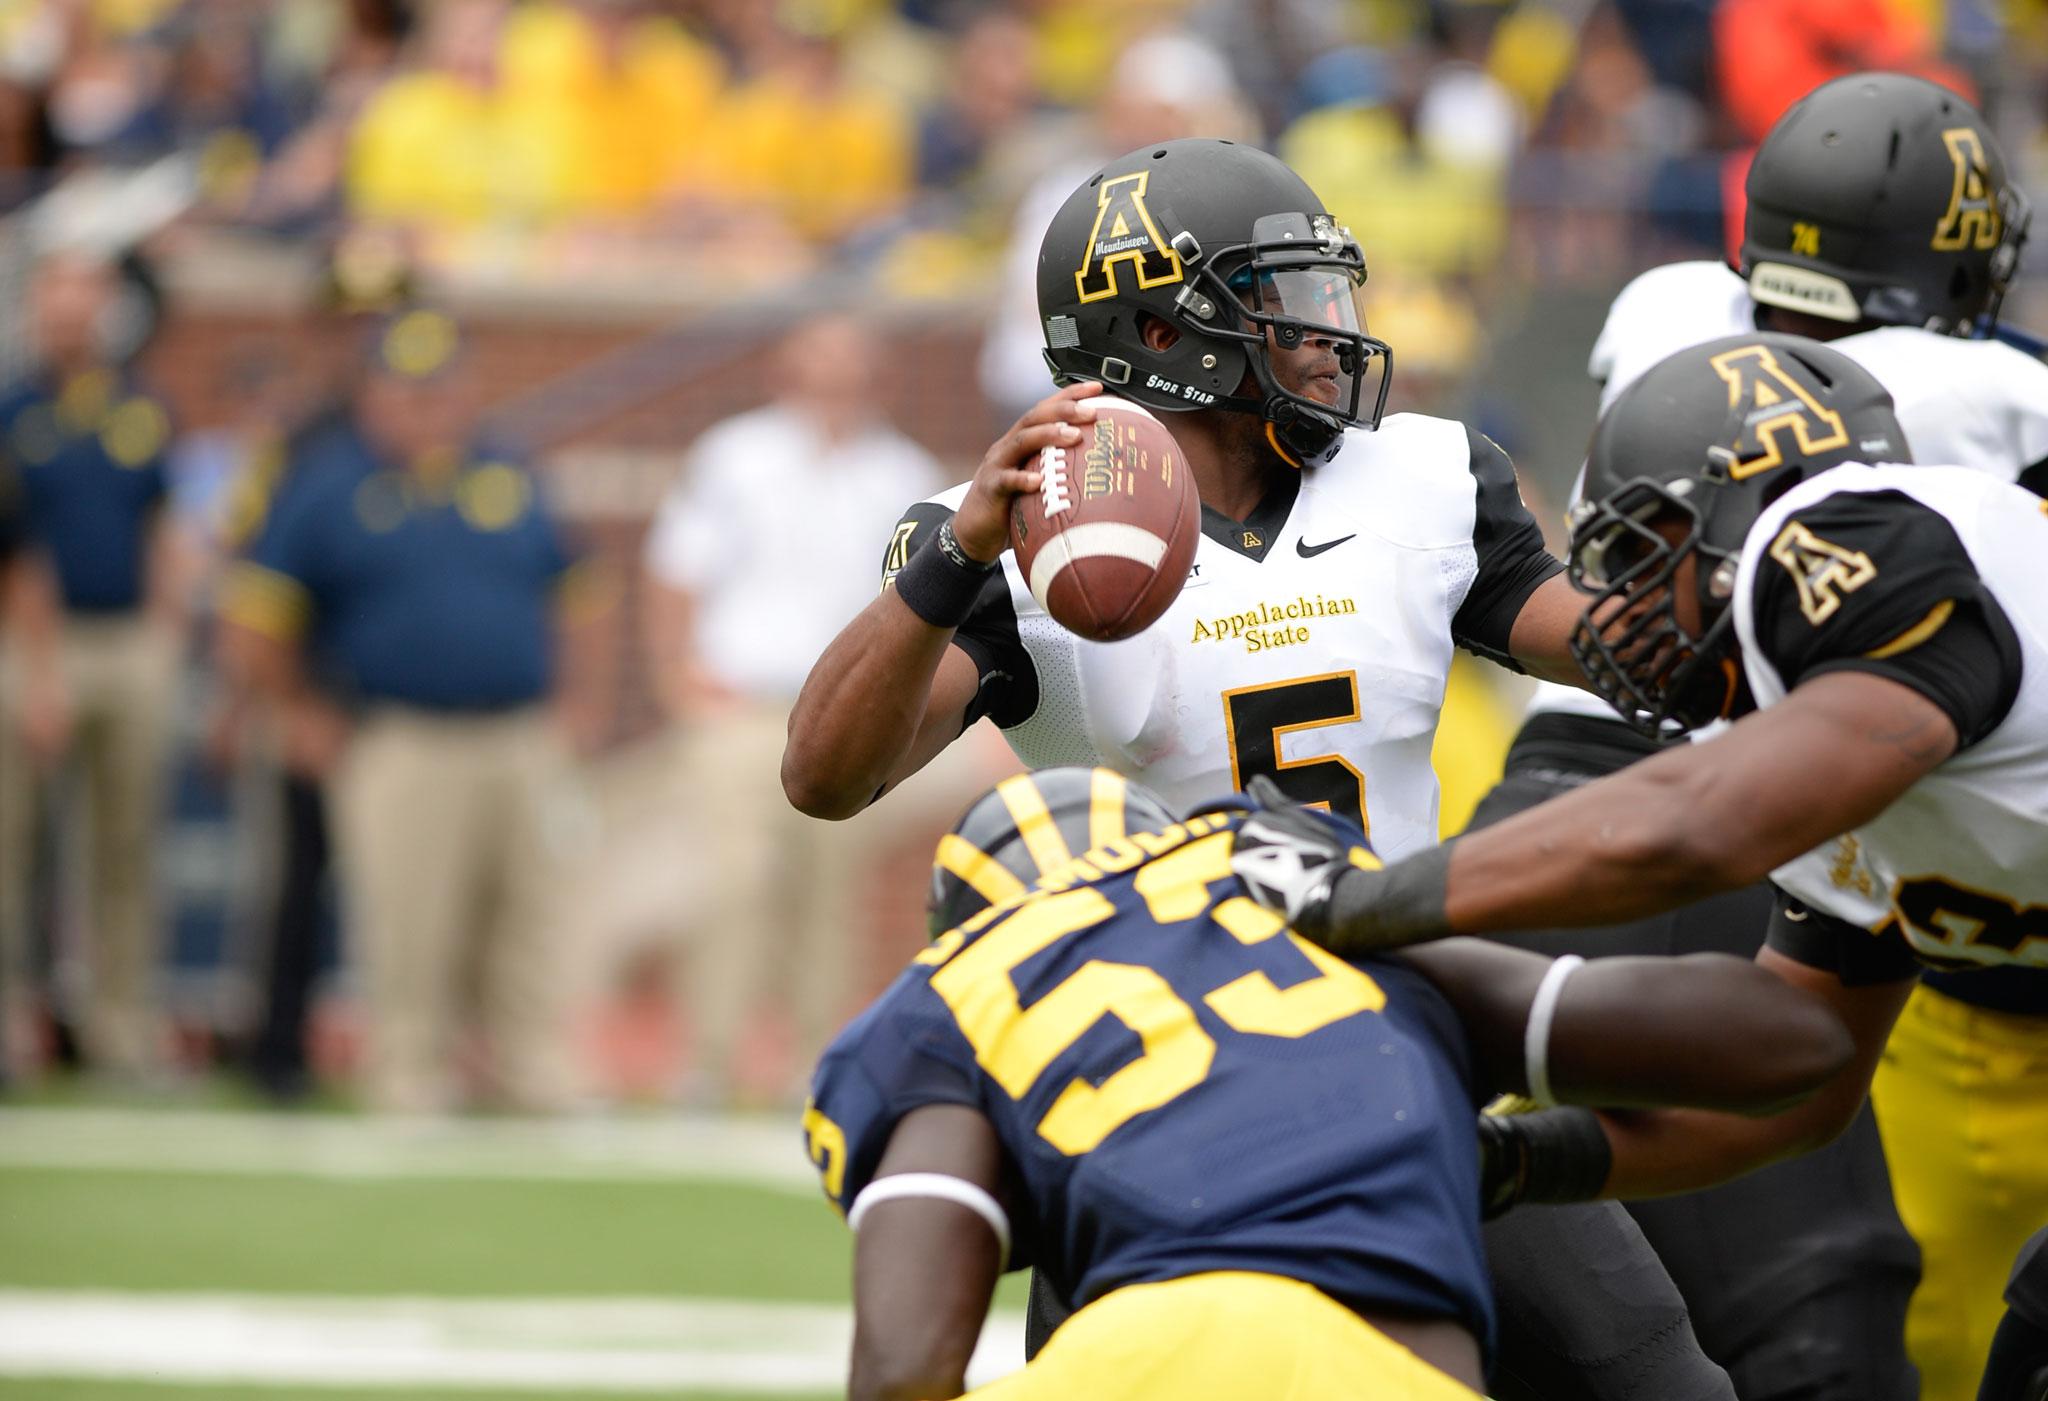 Junior quarterback Kameron Bryant fights to pass the ball down the field during the second half of Saturday's season opener against Michigan. The Mountaineers fell to the Wolverines 52-14. Photo by Justin Perry  |  The Appalachian